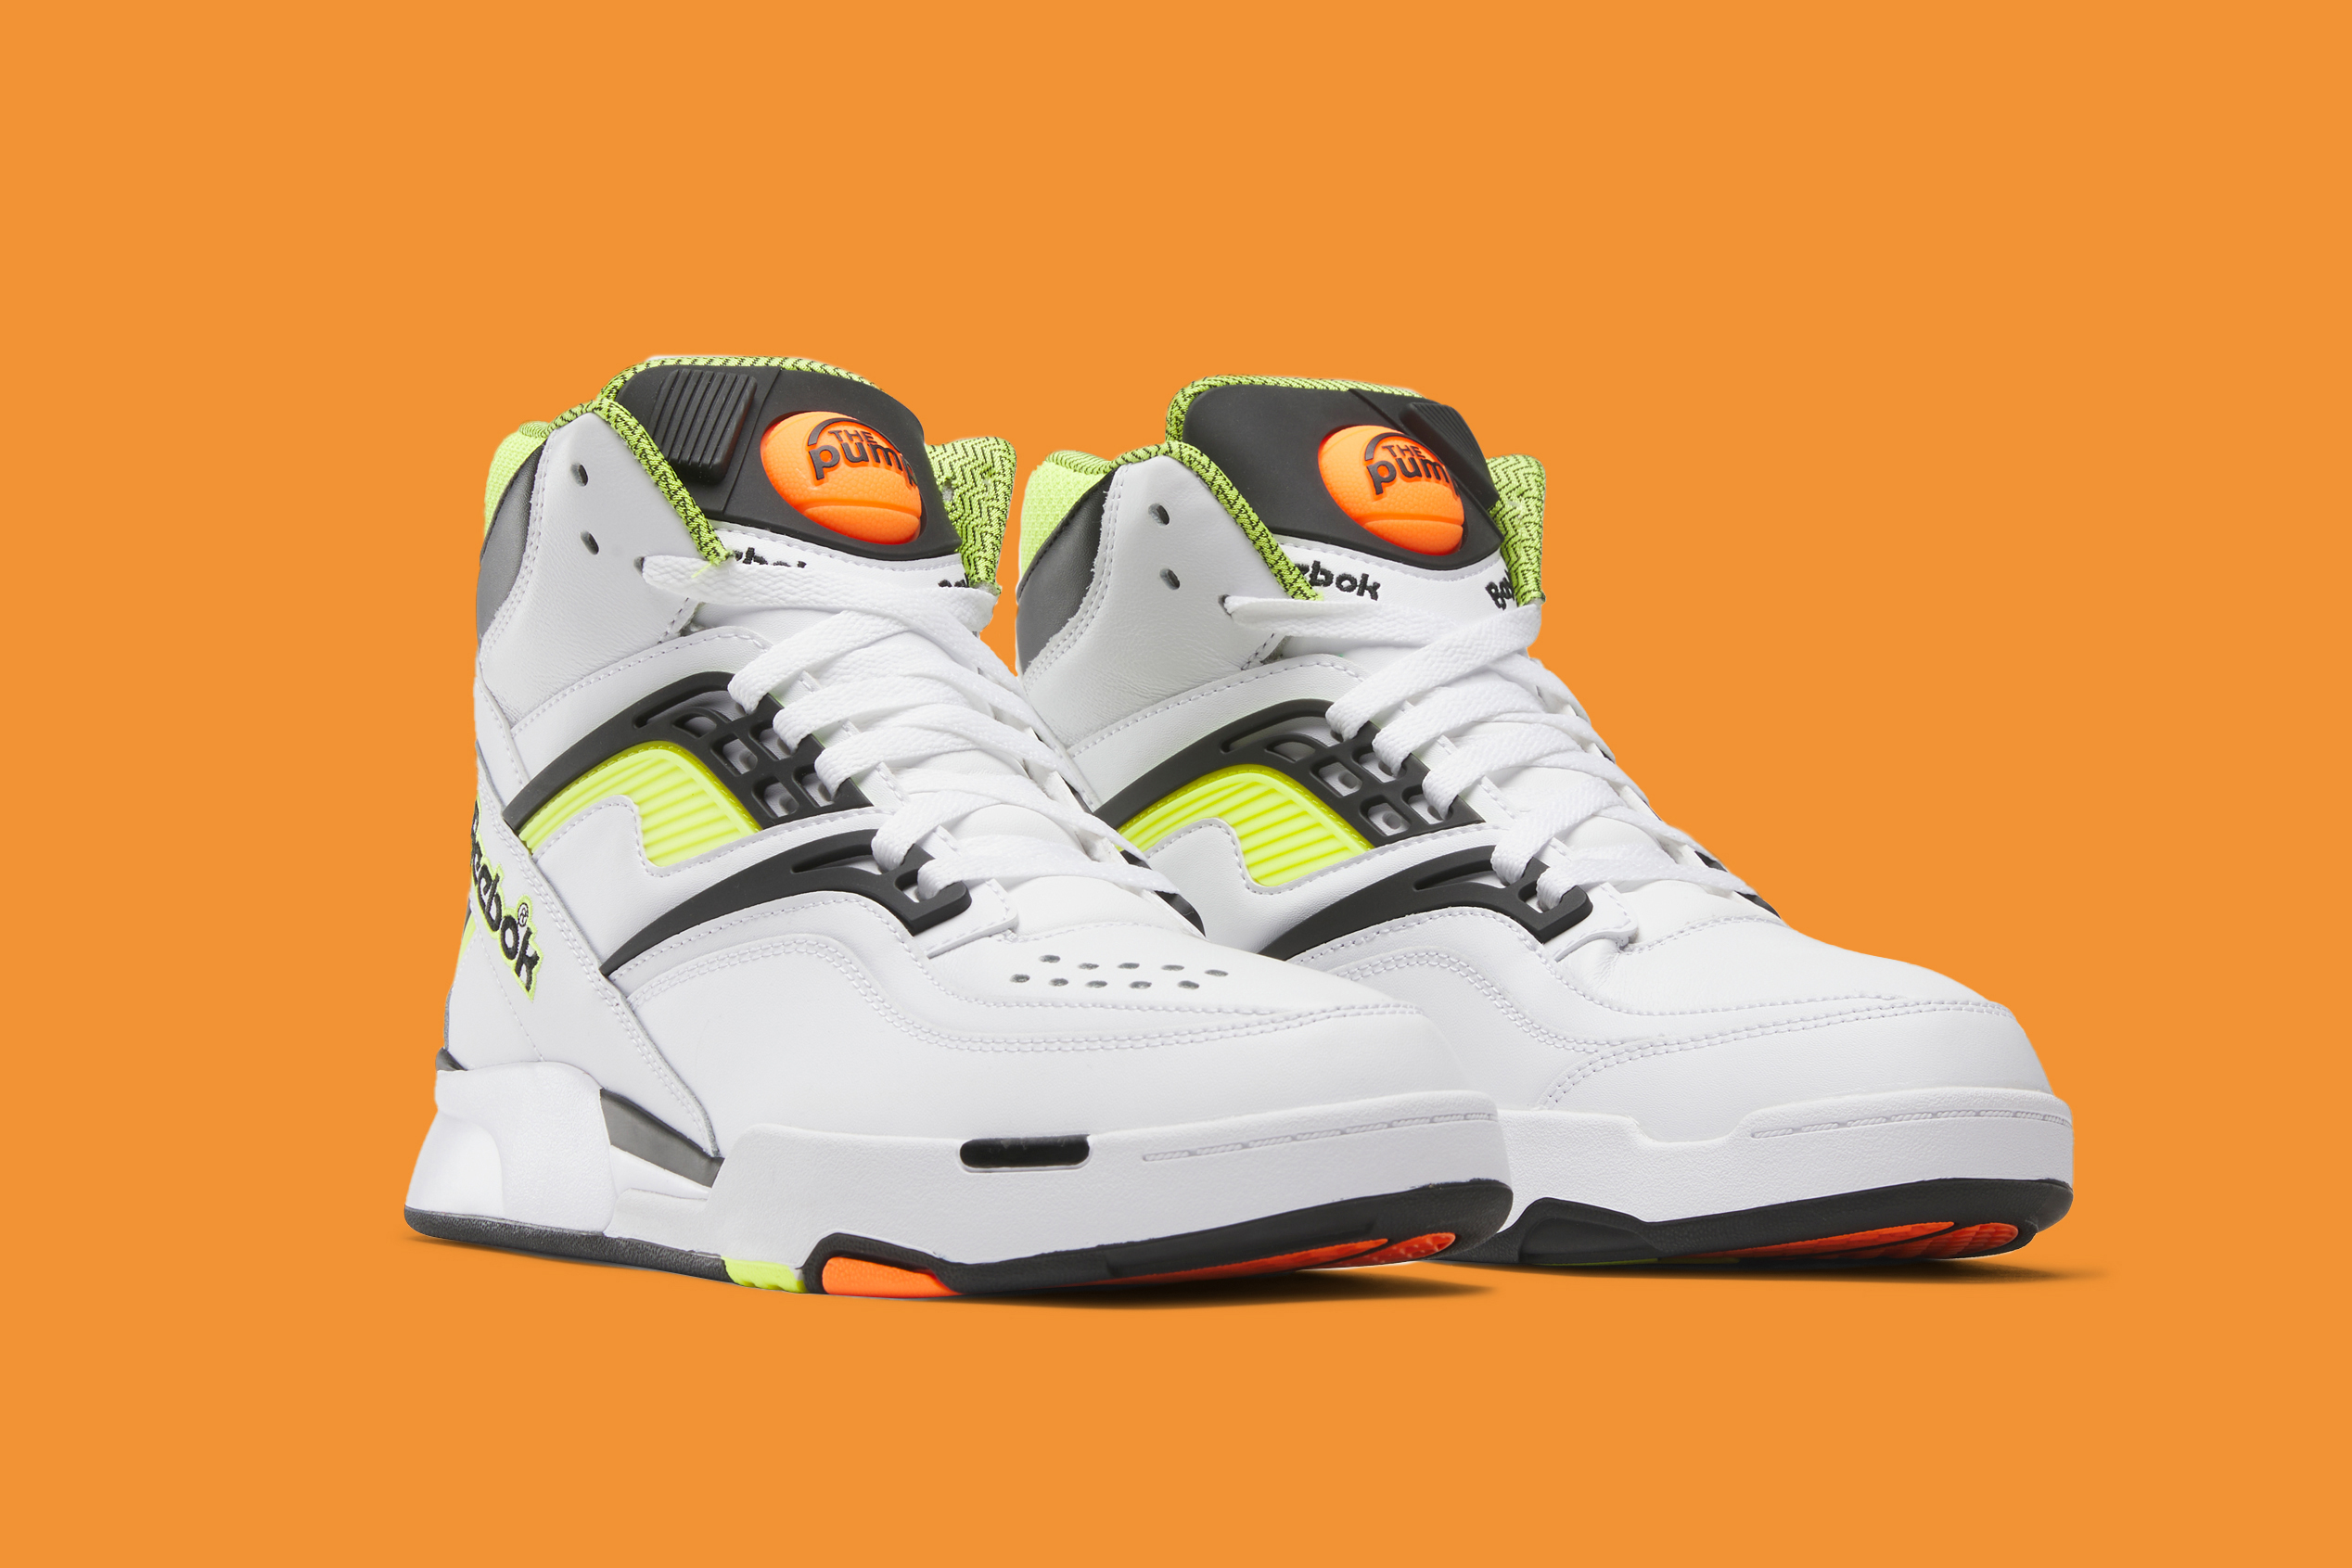 Reebok Accents the Pump TZ With “Solar Yellow” Hits